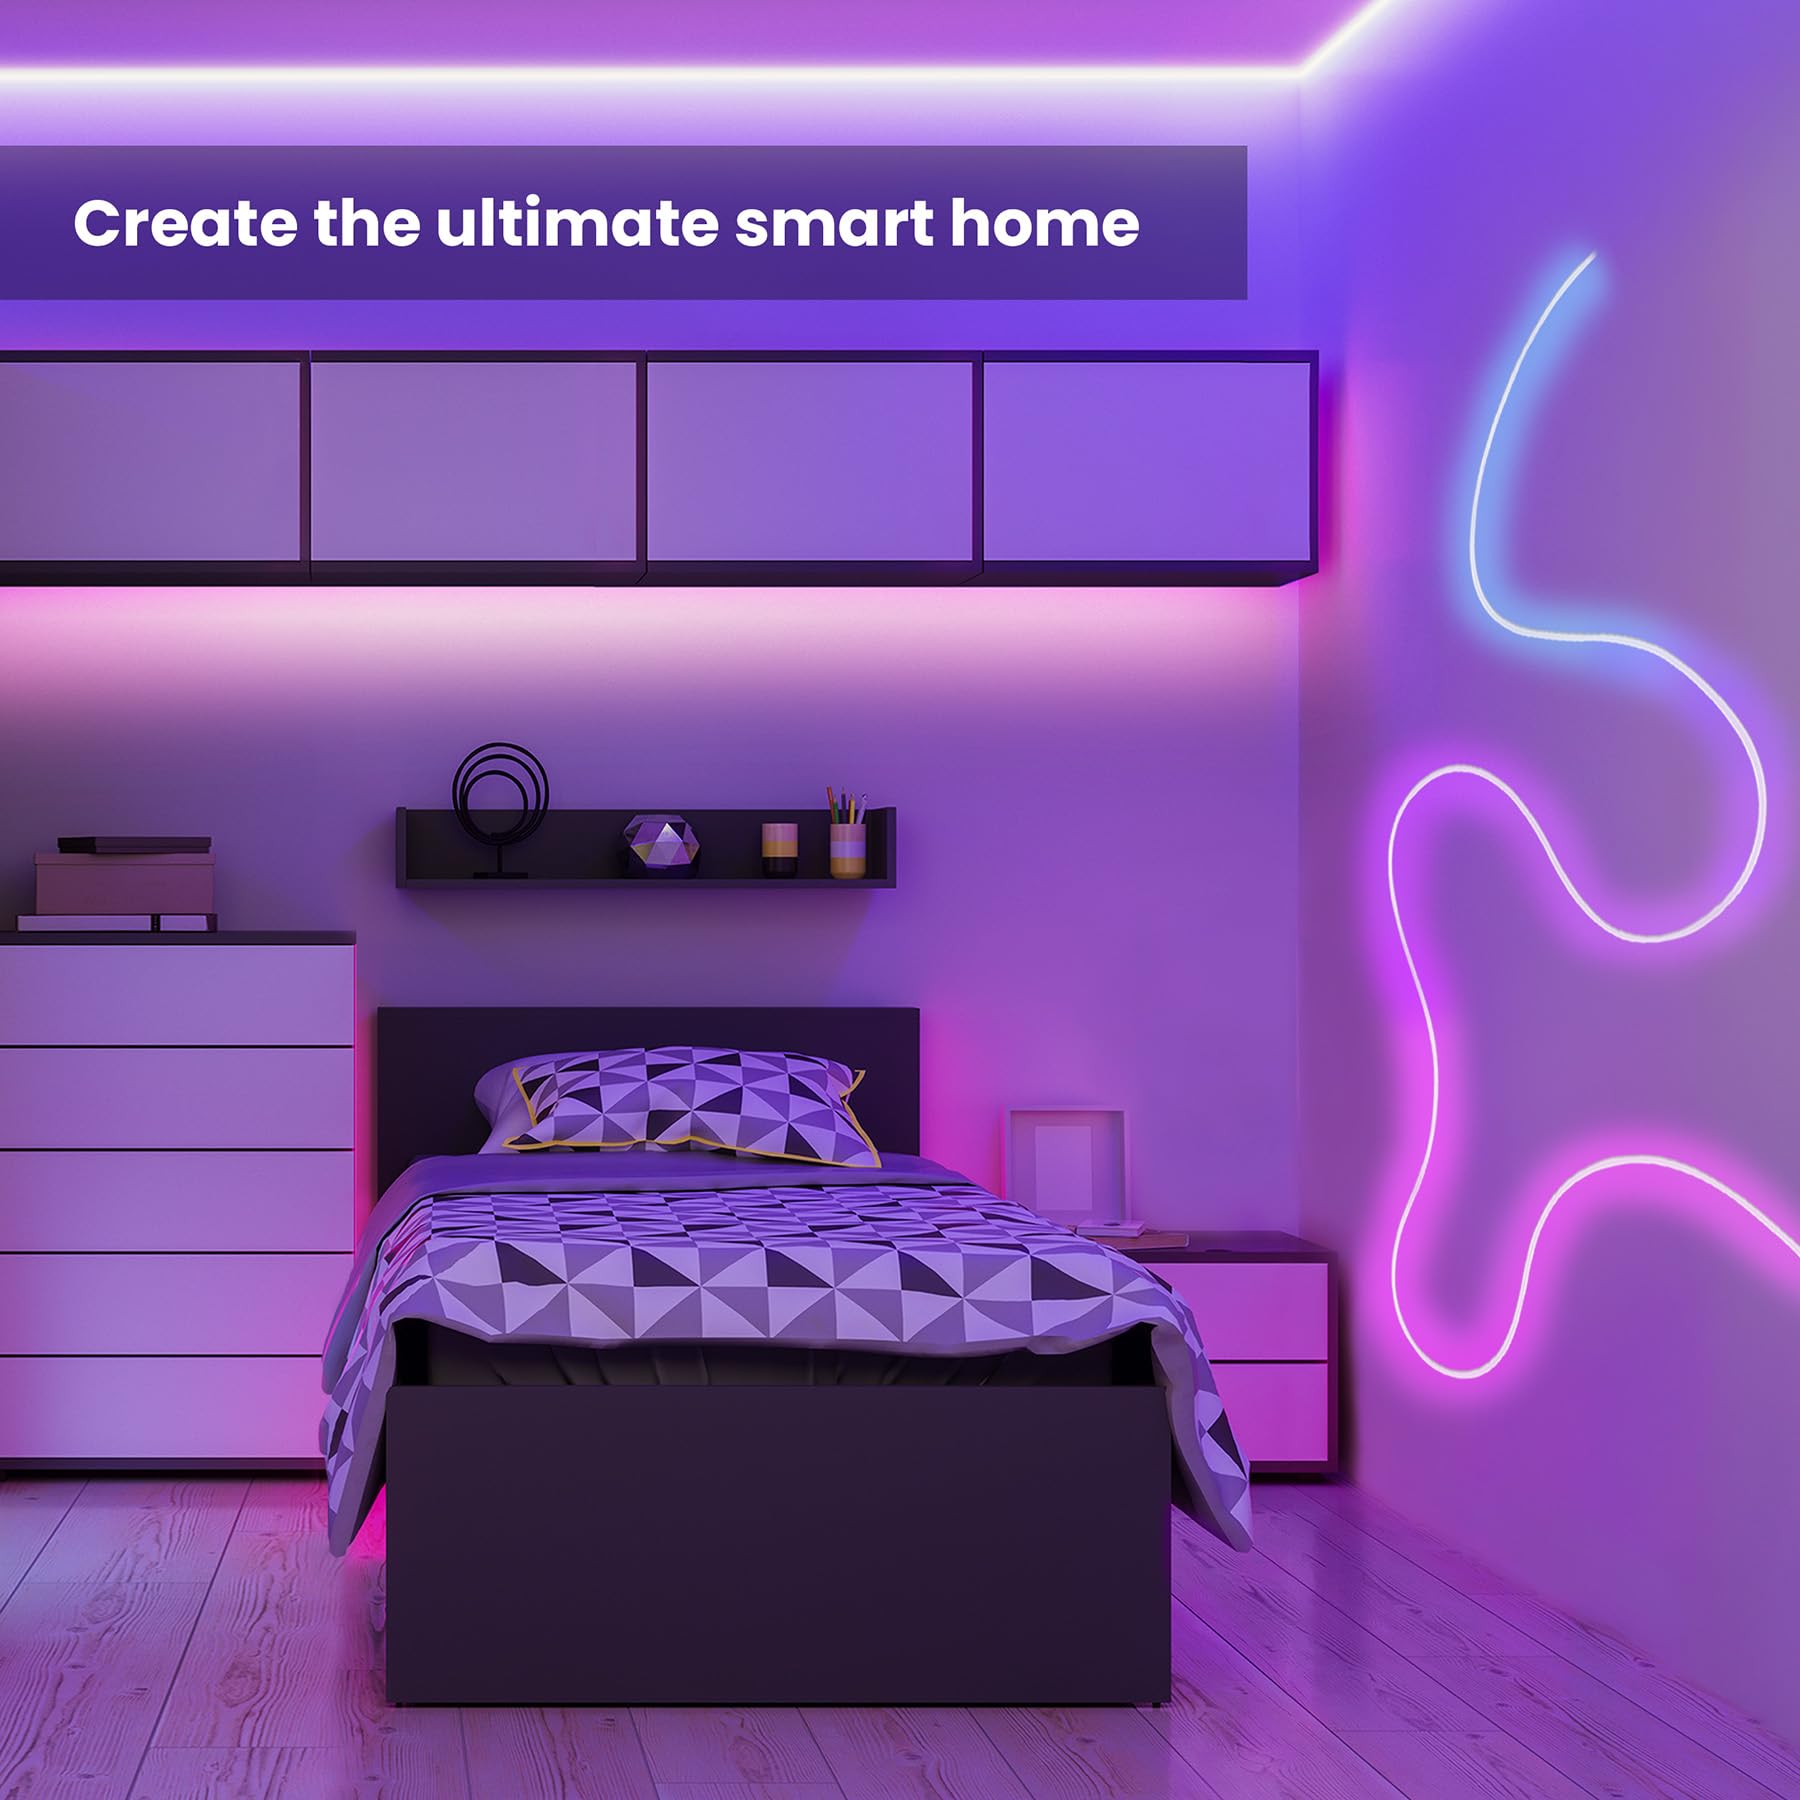 Feit Electric Smart Neon Strip Lights 10FT, Flexible RGBW Color Chasing LED Light Strip, 2.4GHz WiFi Enabled, Works with Alexa and Google Home Assistant, 22W, Music Sync, App Control NF10/CHASE/AG